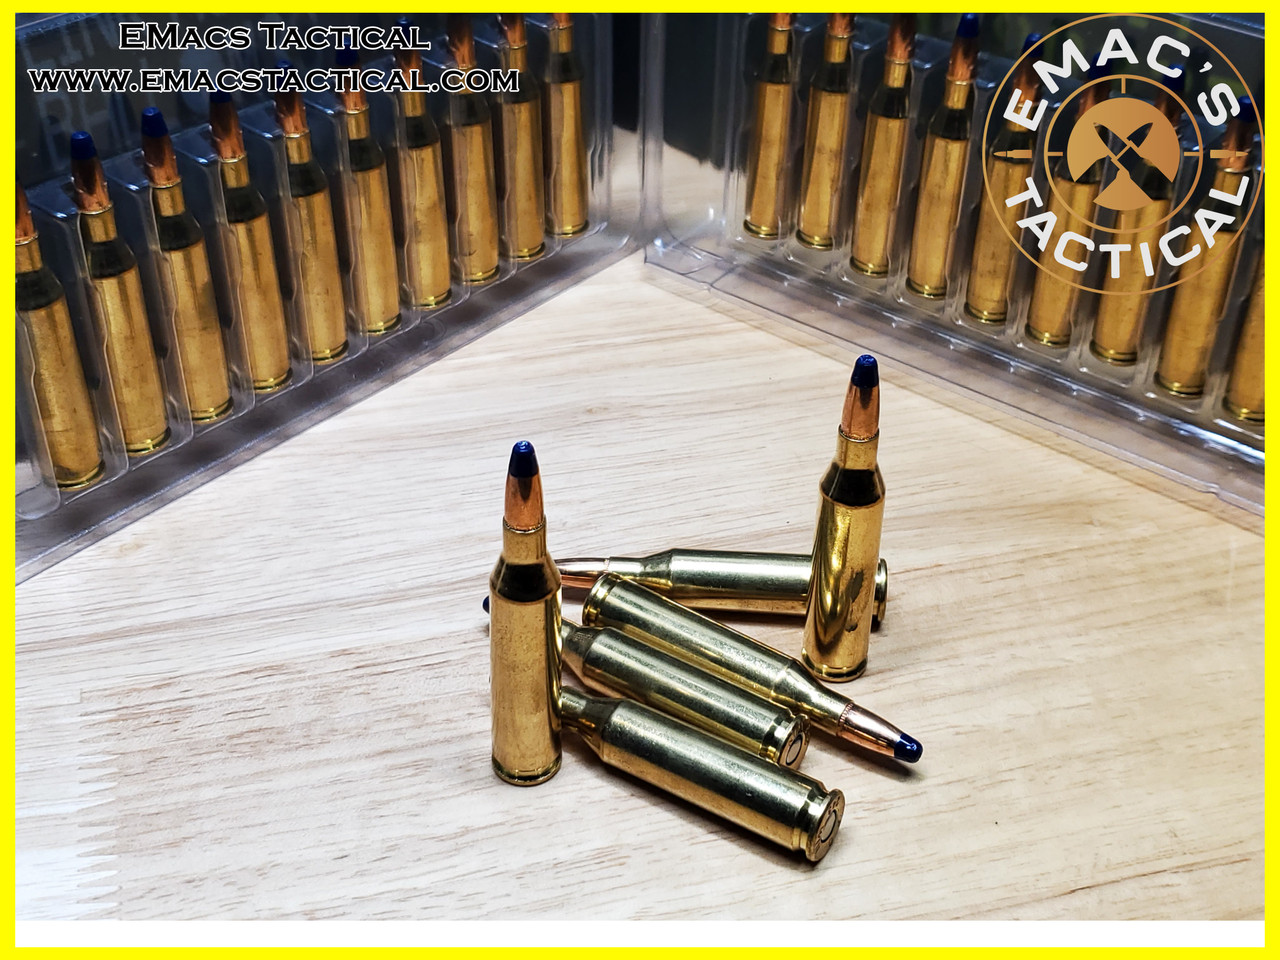 243 Heavy Incendiary [10x] Count Specialty Ammunition